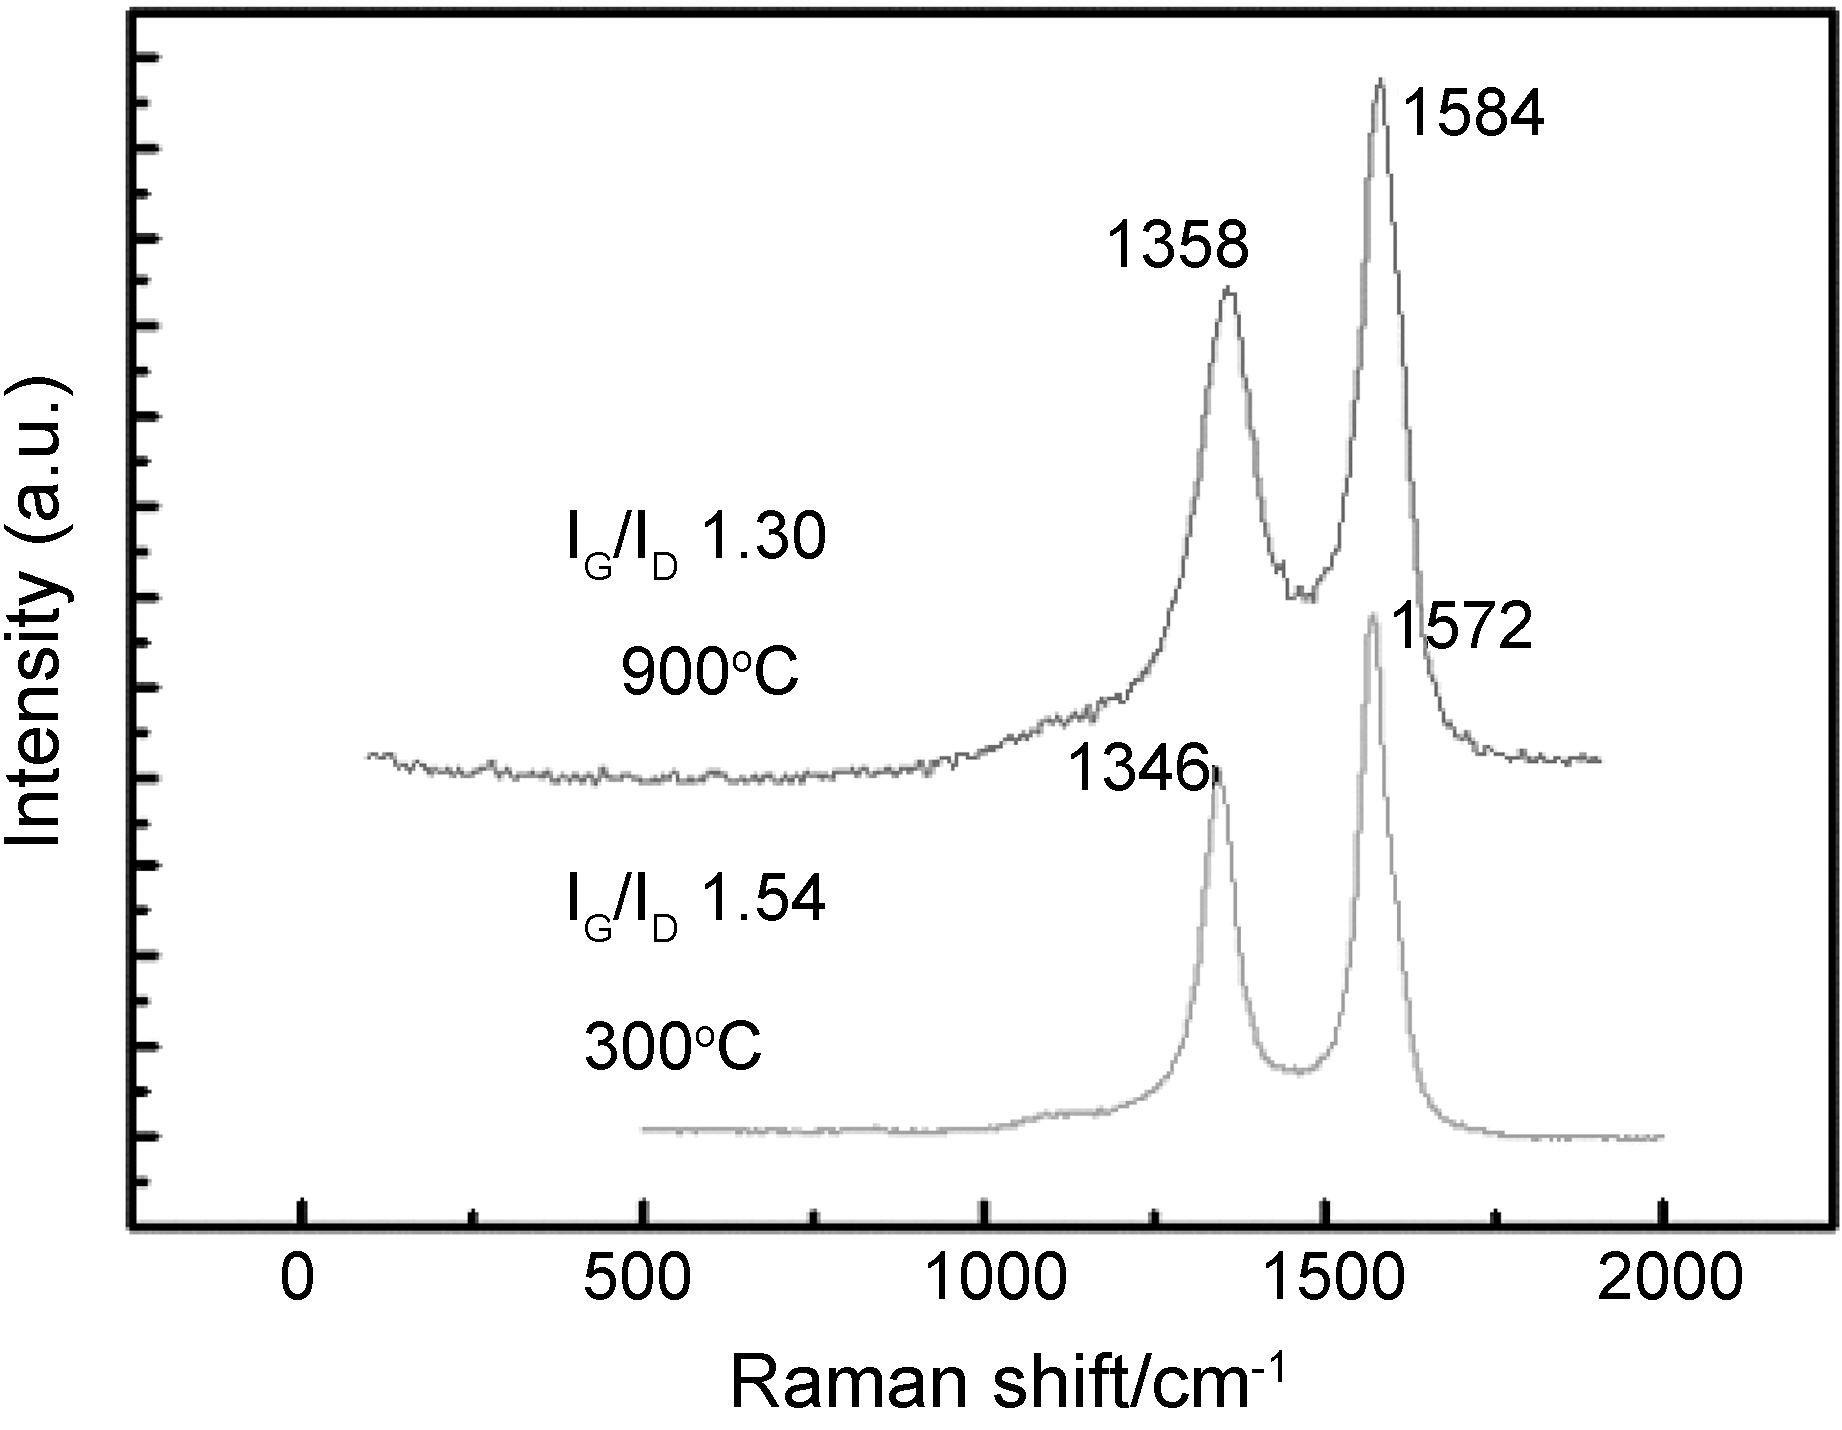 Raman spectra of carbon nanotubes chemically vapordeposited at (a) 900℃ without local heating and (b) 300℃ with local surface heating by applying 125 V.